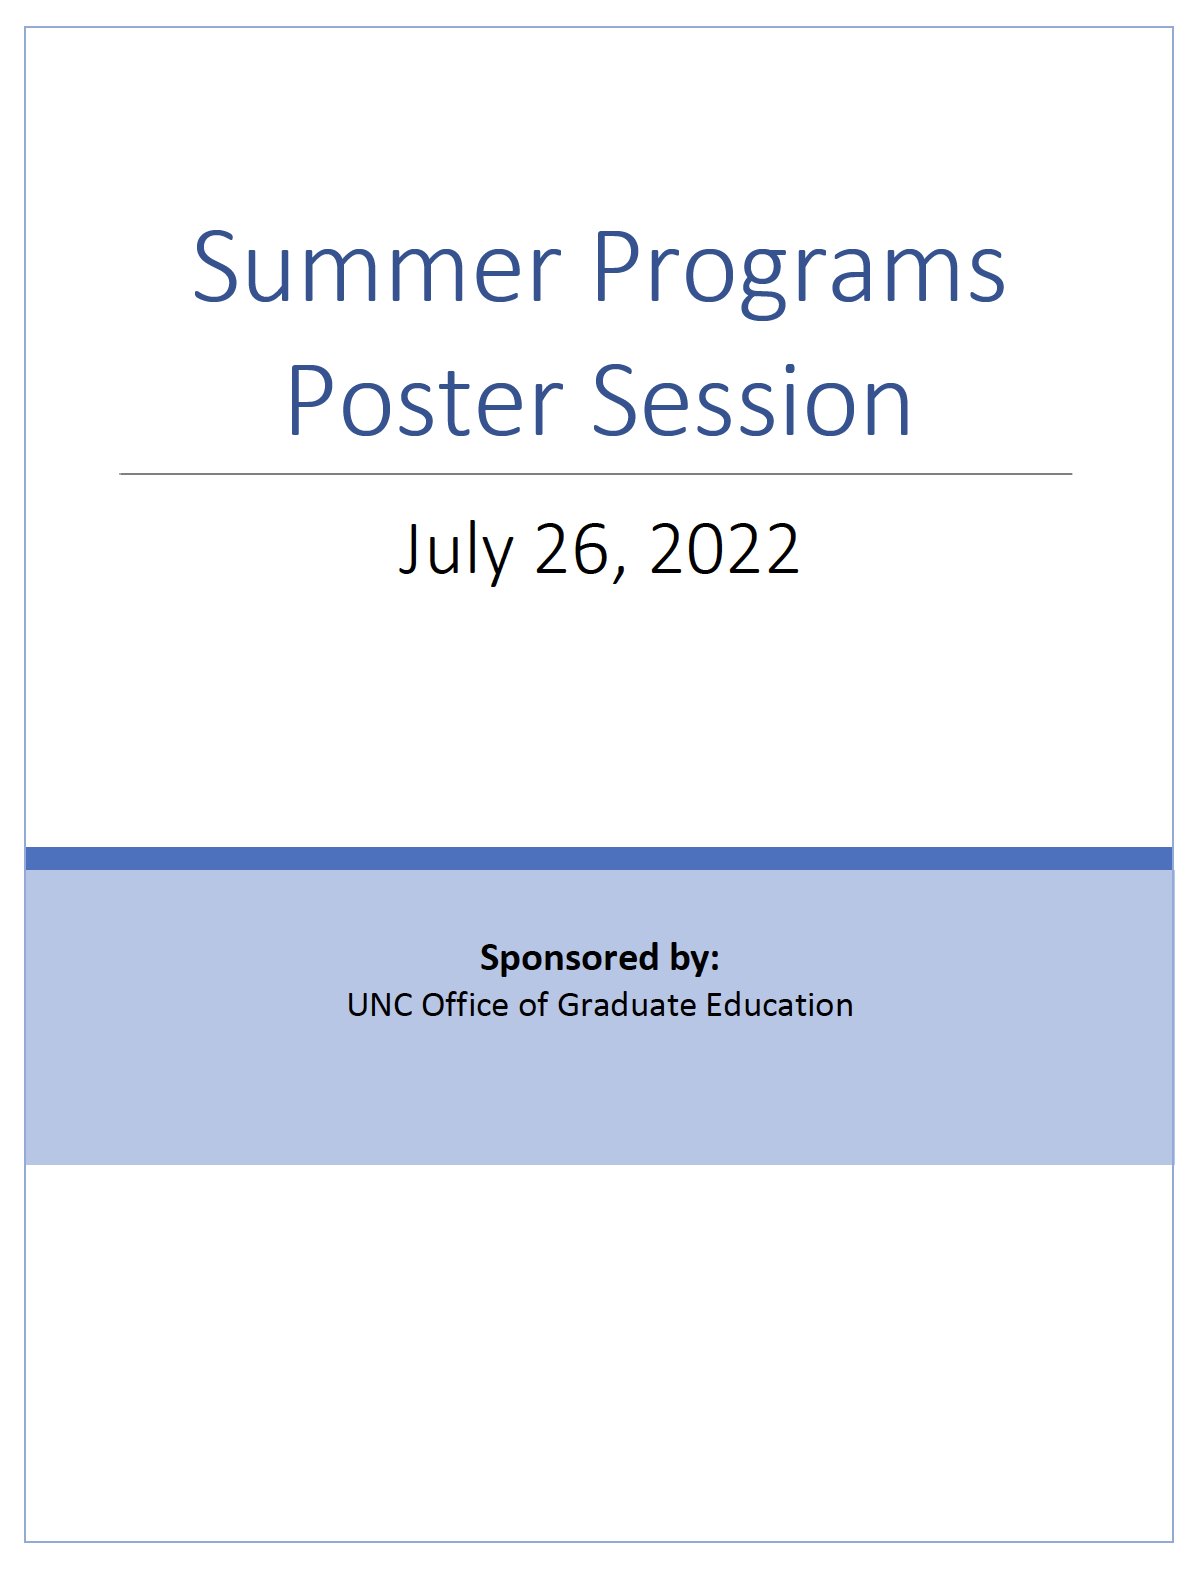 summer poster session 7-26-2022